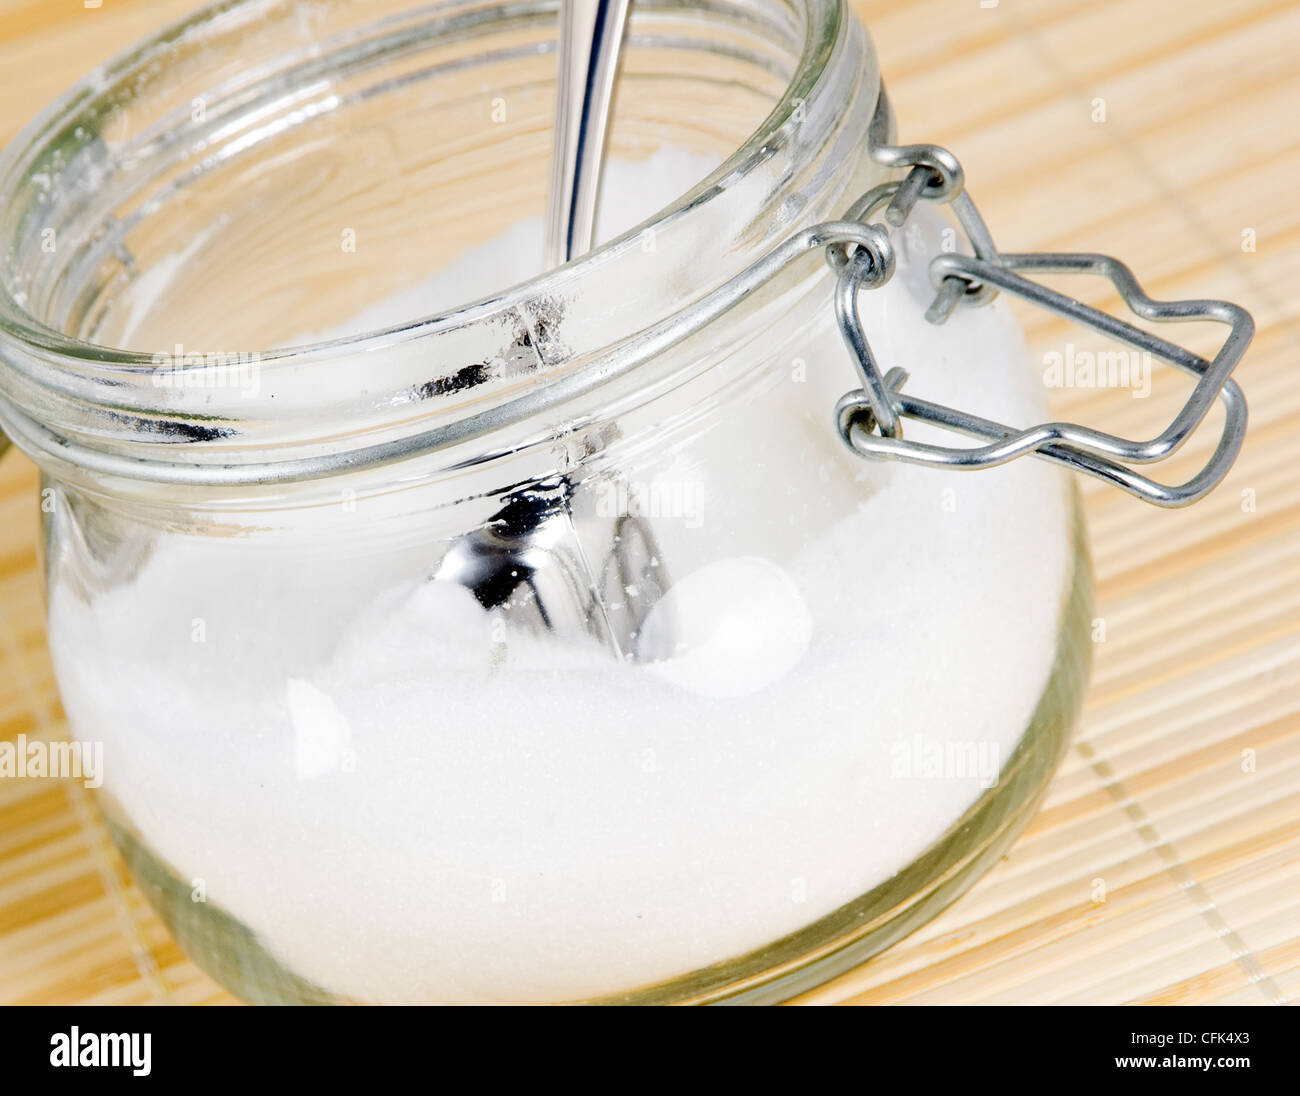 White sugar in glass jar with spoon Stock Photo